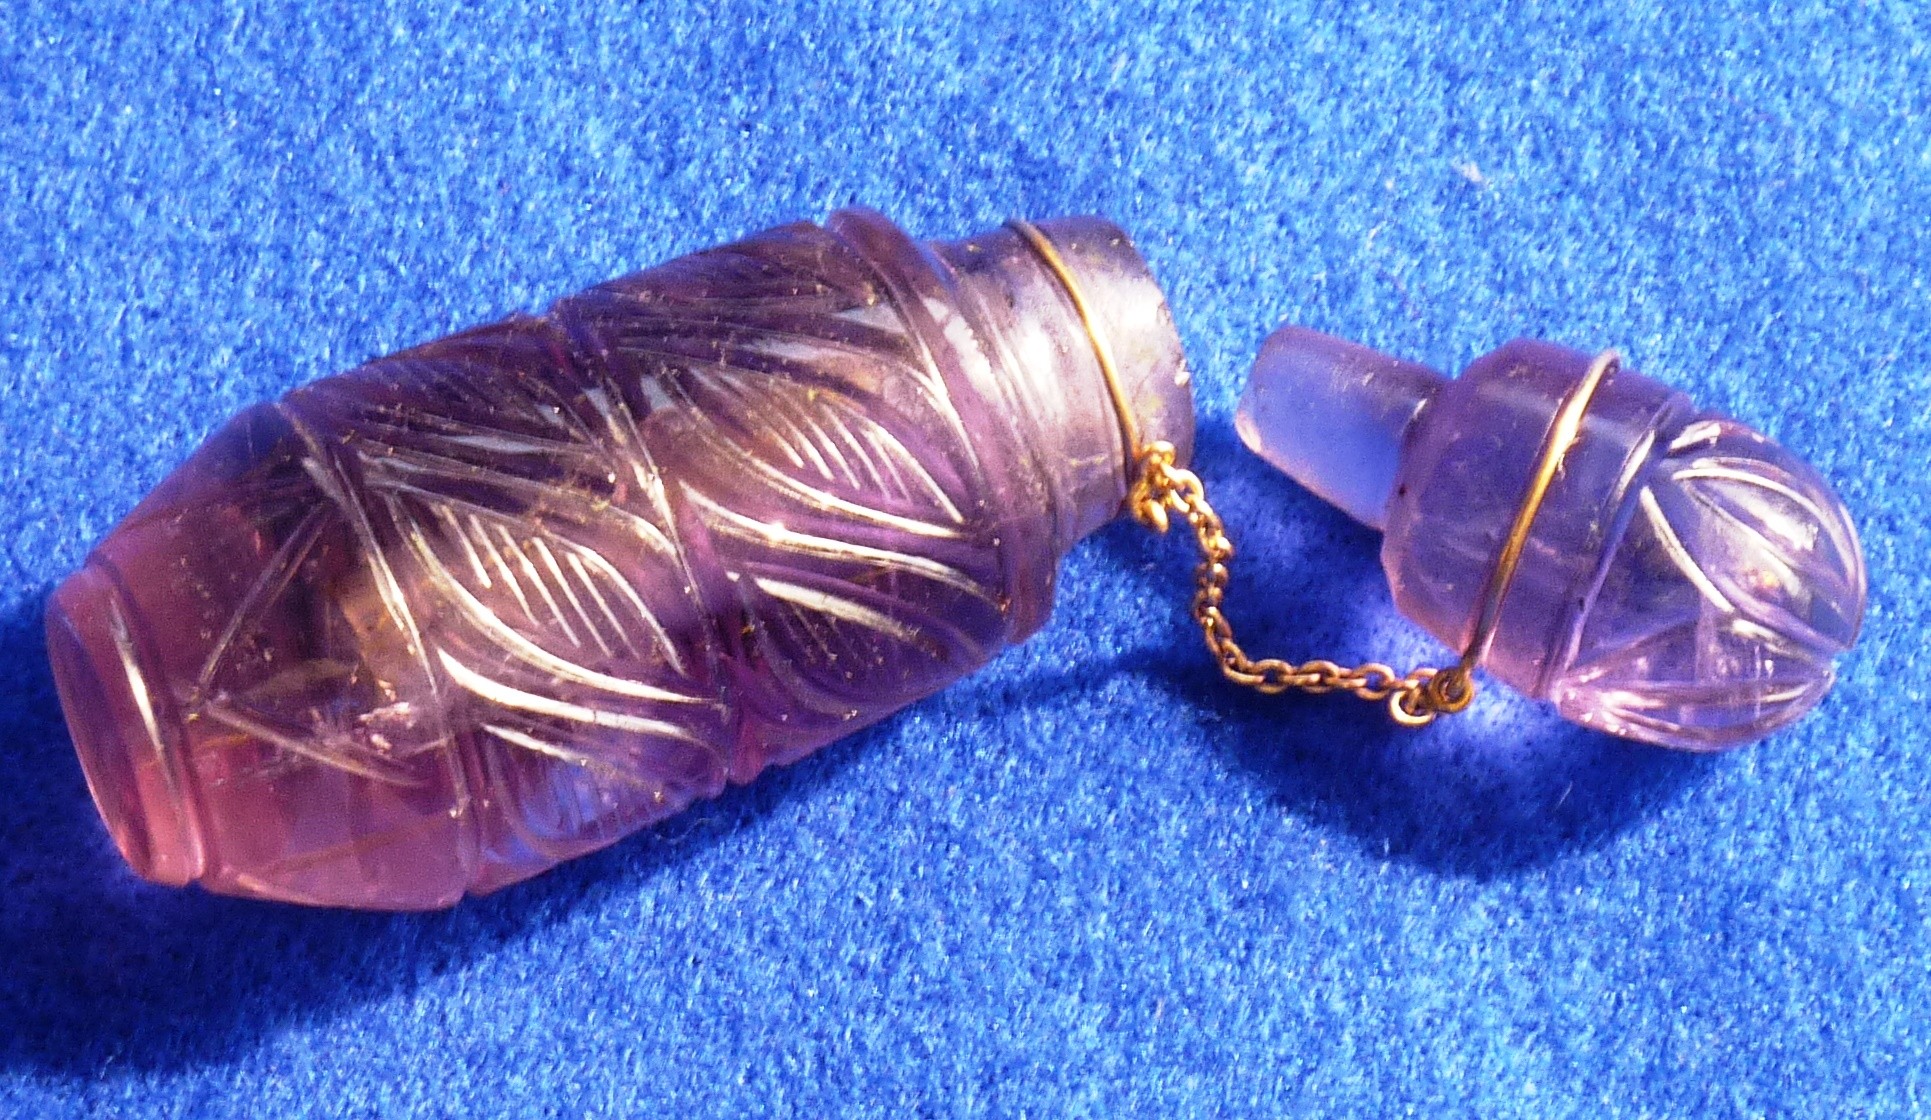 A small amethyst quartz Scent Bottle and Stopper, the Stopper attached to the body with chain,